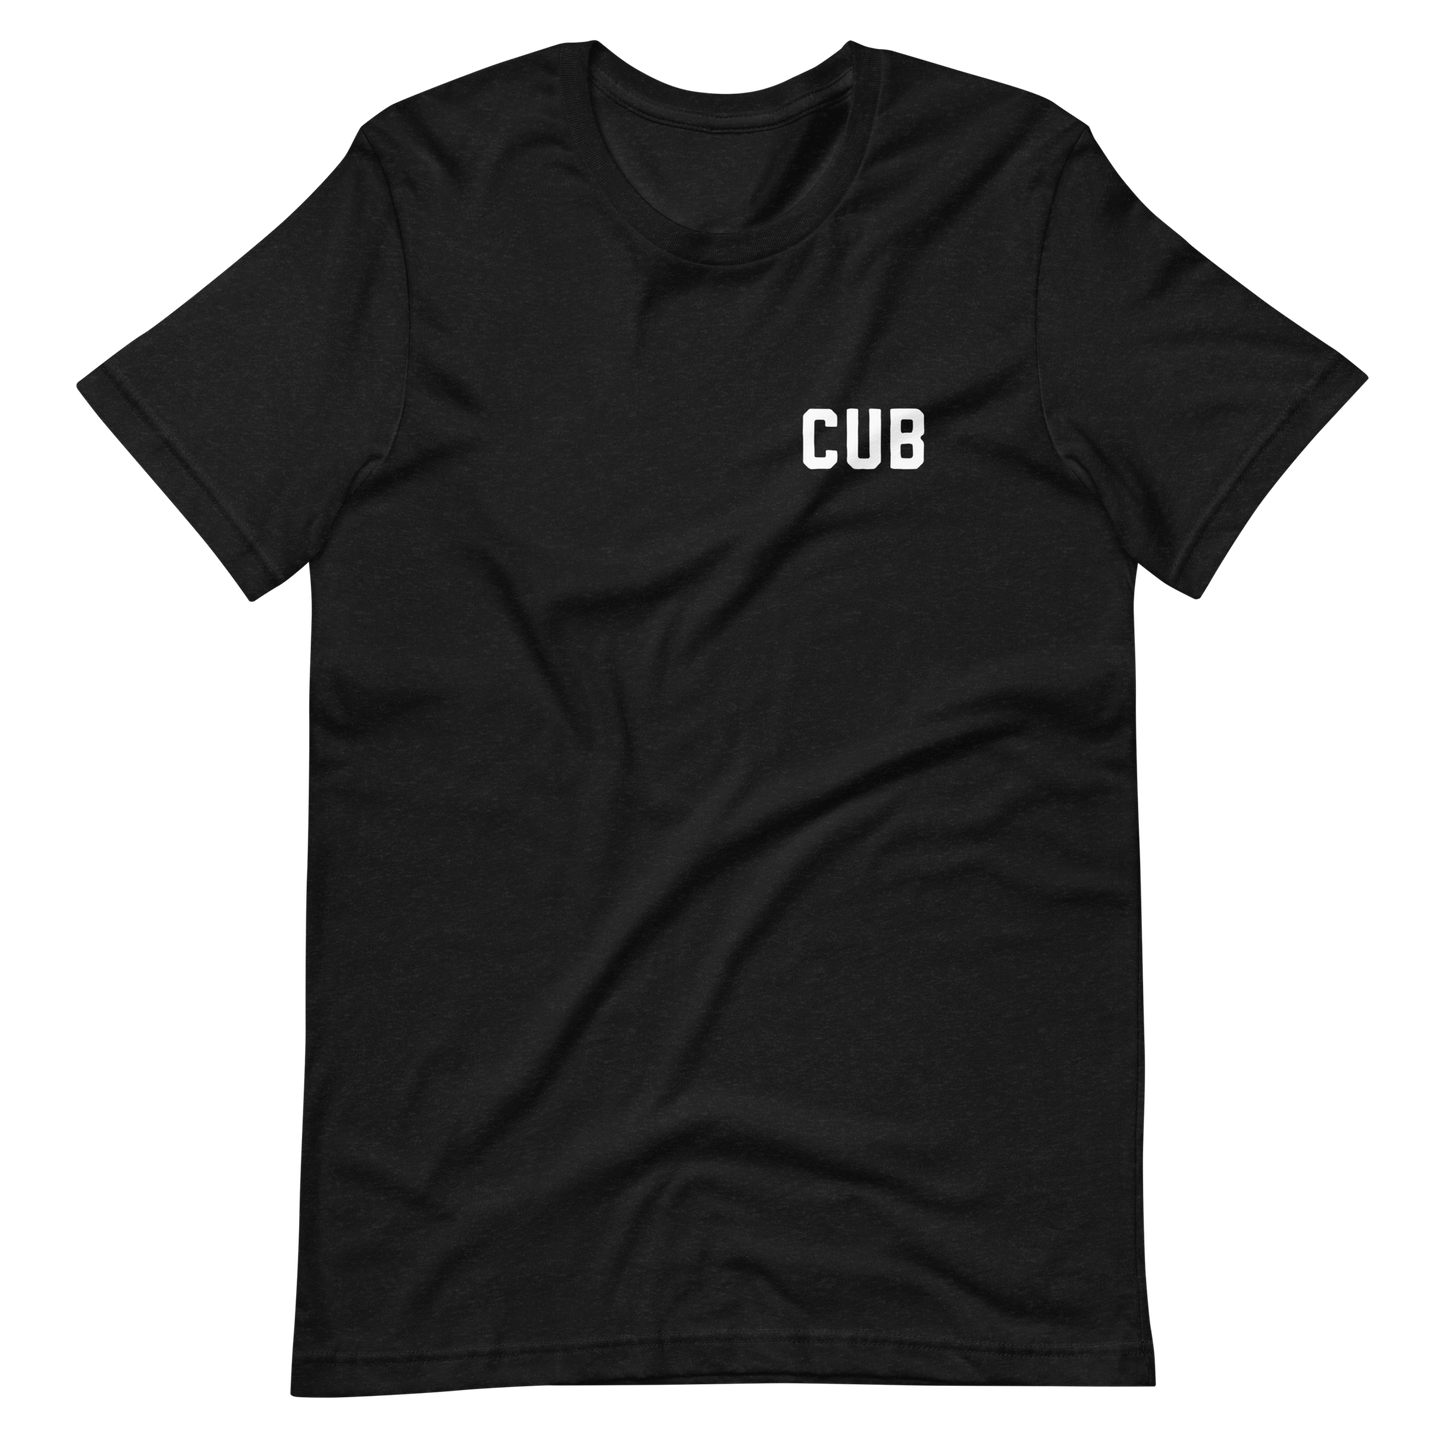 Cubbybear & Brothers T-Shirt (Two Sided)